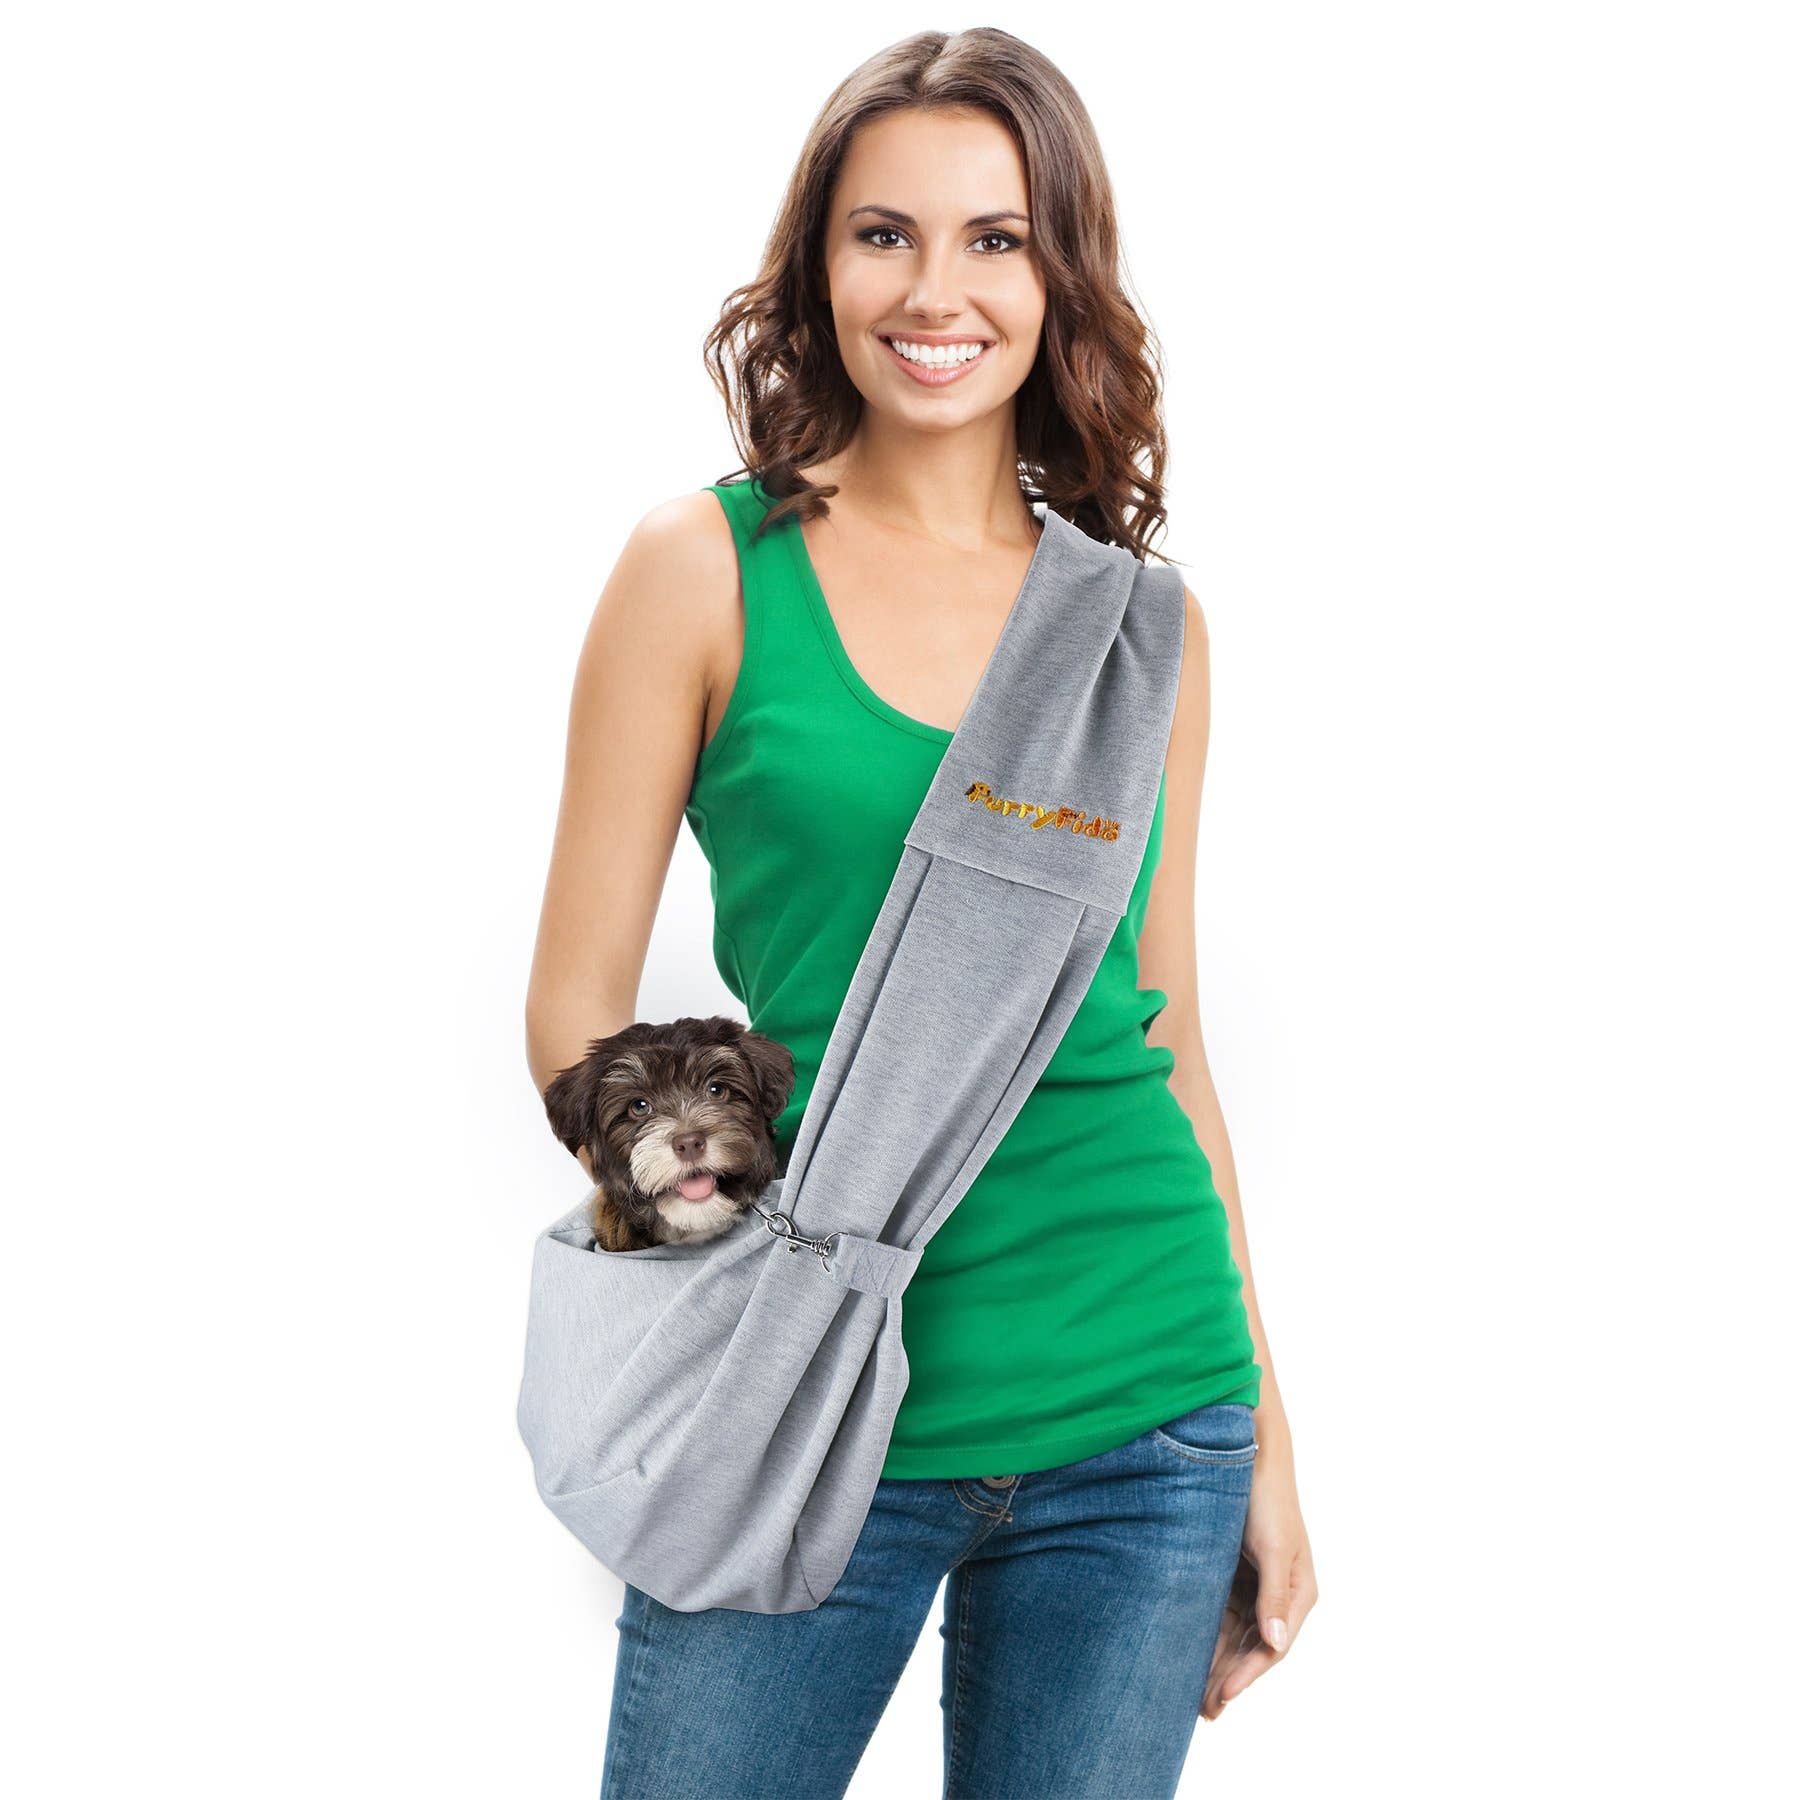 Furry Fido Small Pet Sling Carrier:The Comfy and Secure Way to Travel with Your Furry Friend!